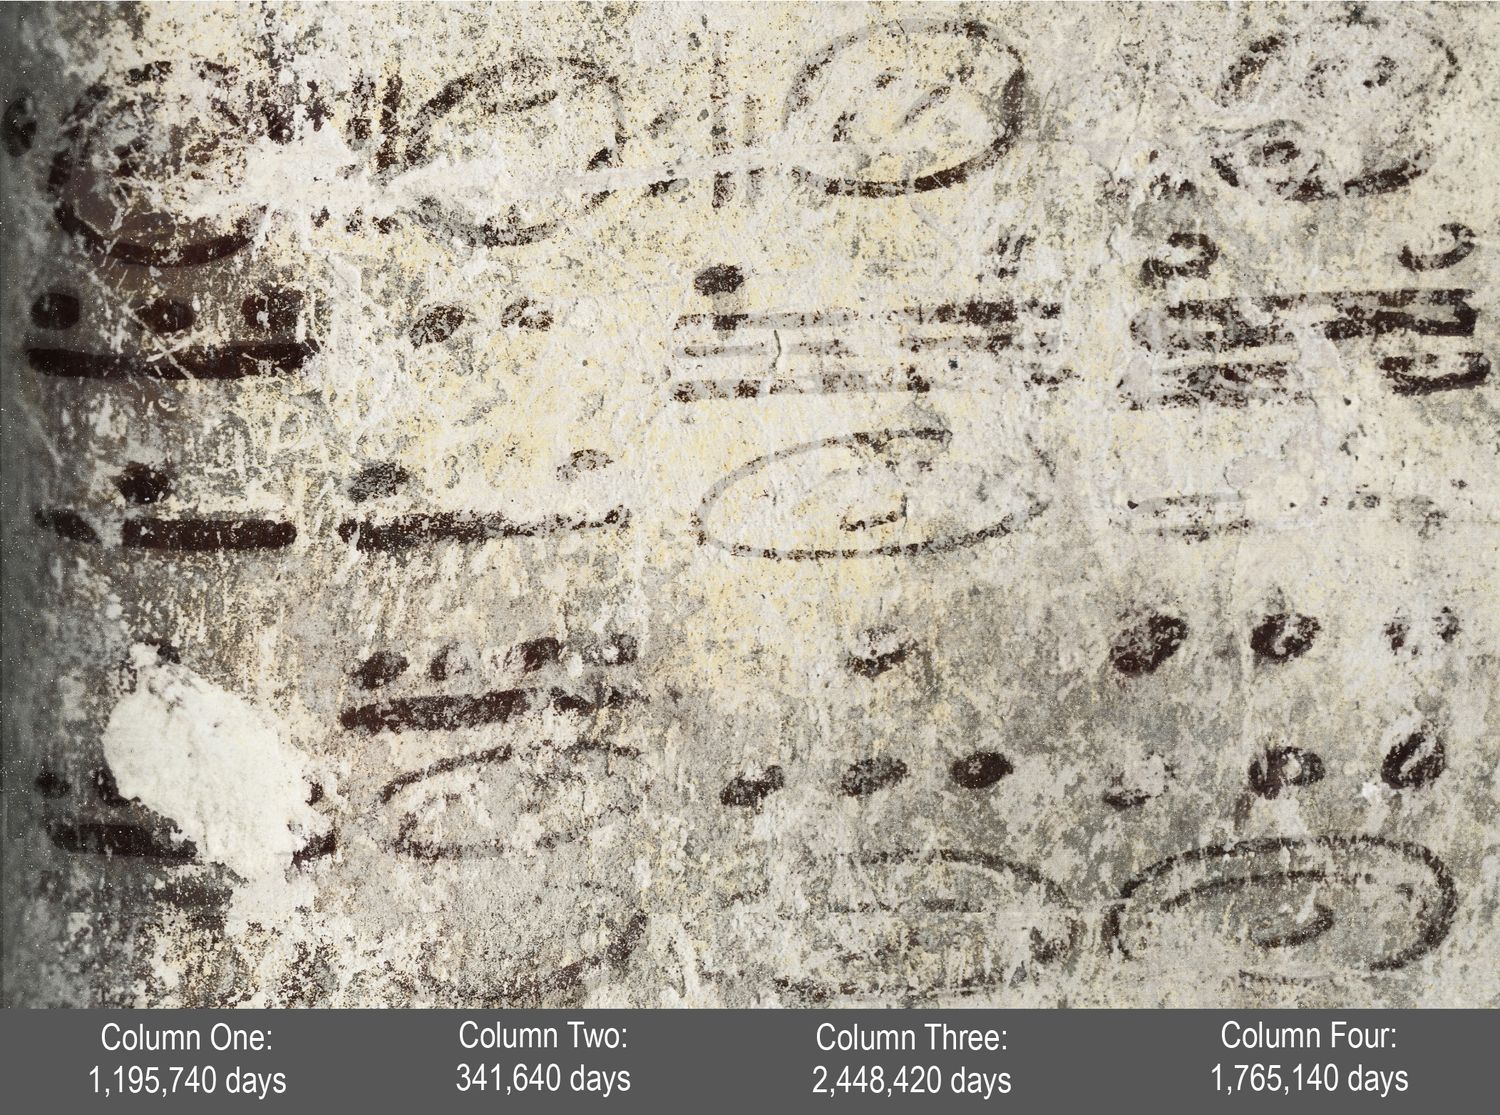 Painted ancient Maya numbers reflect reaching well beyond 2012 (w/ Video)